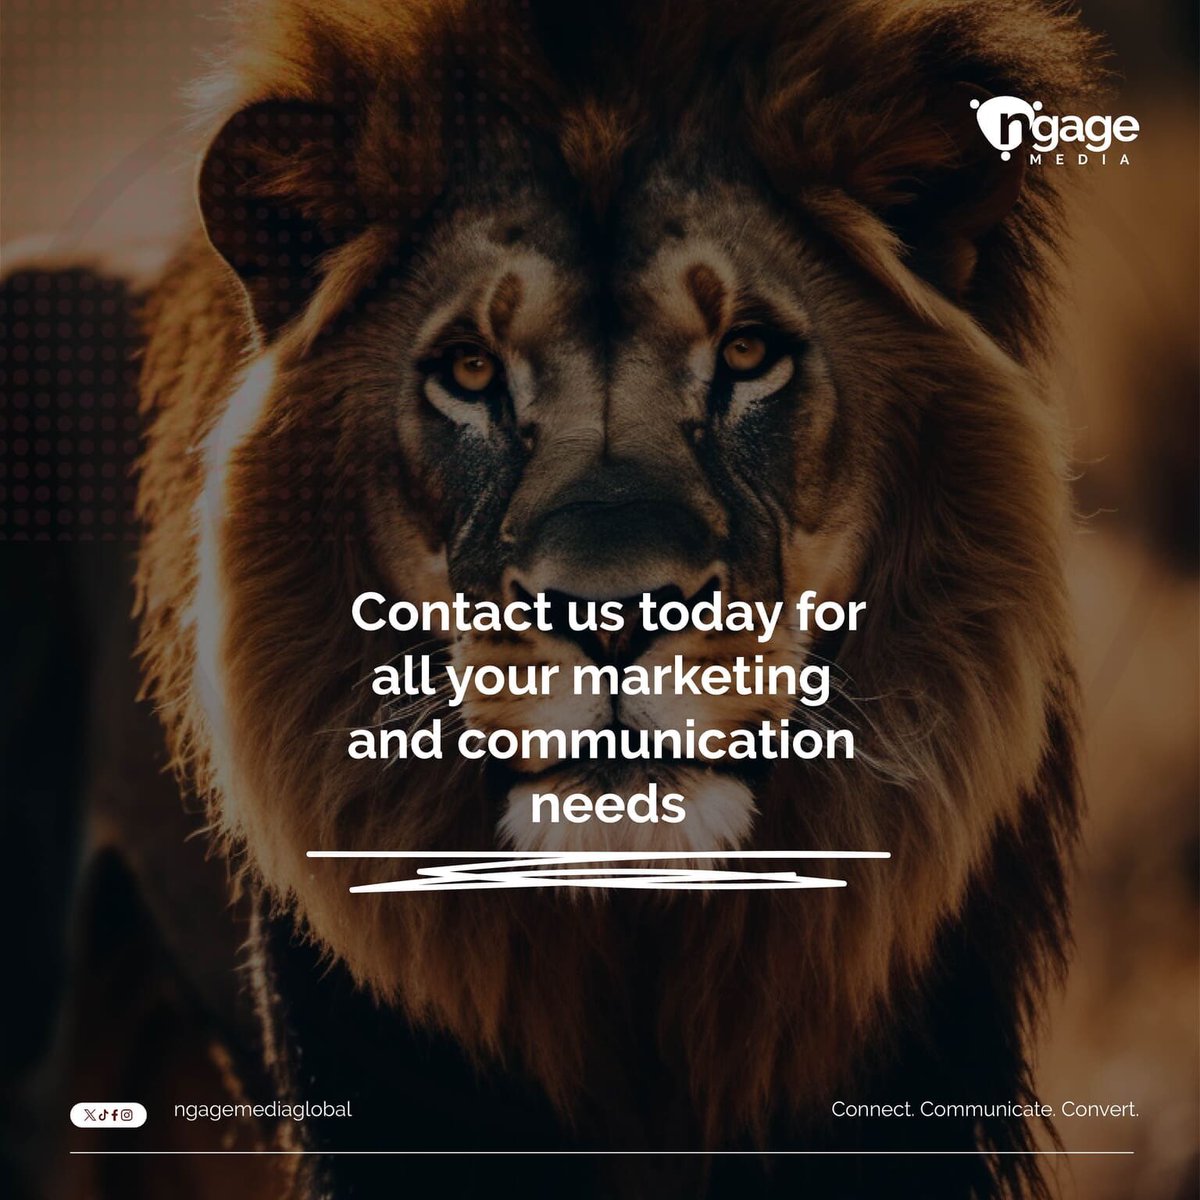 In today’s crowded marketplace, a brand without a voice is an invisible brand and we want your brand to be heard. Contact us for all your communication and marketing needs. #TroopersOfNgage #MarketingAndCommunication #Brandvoice